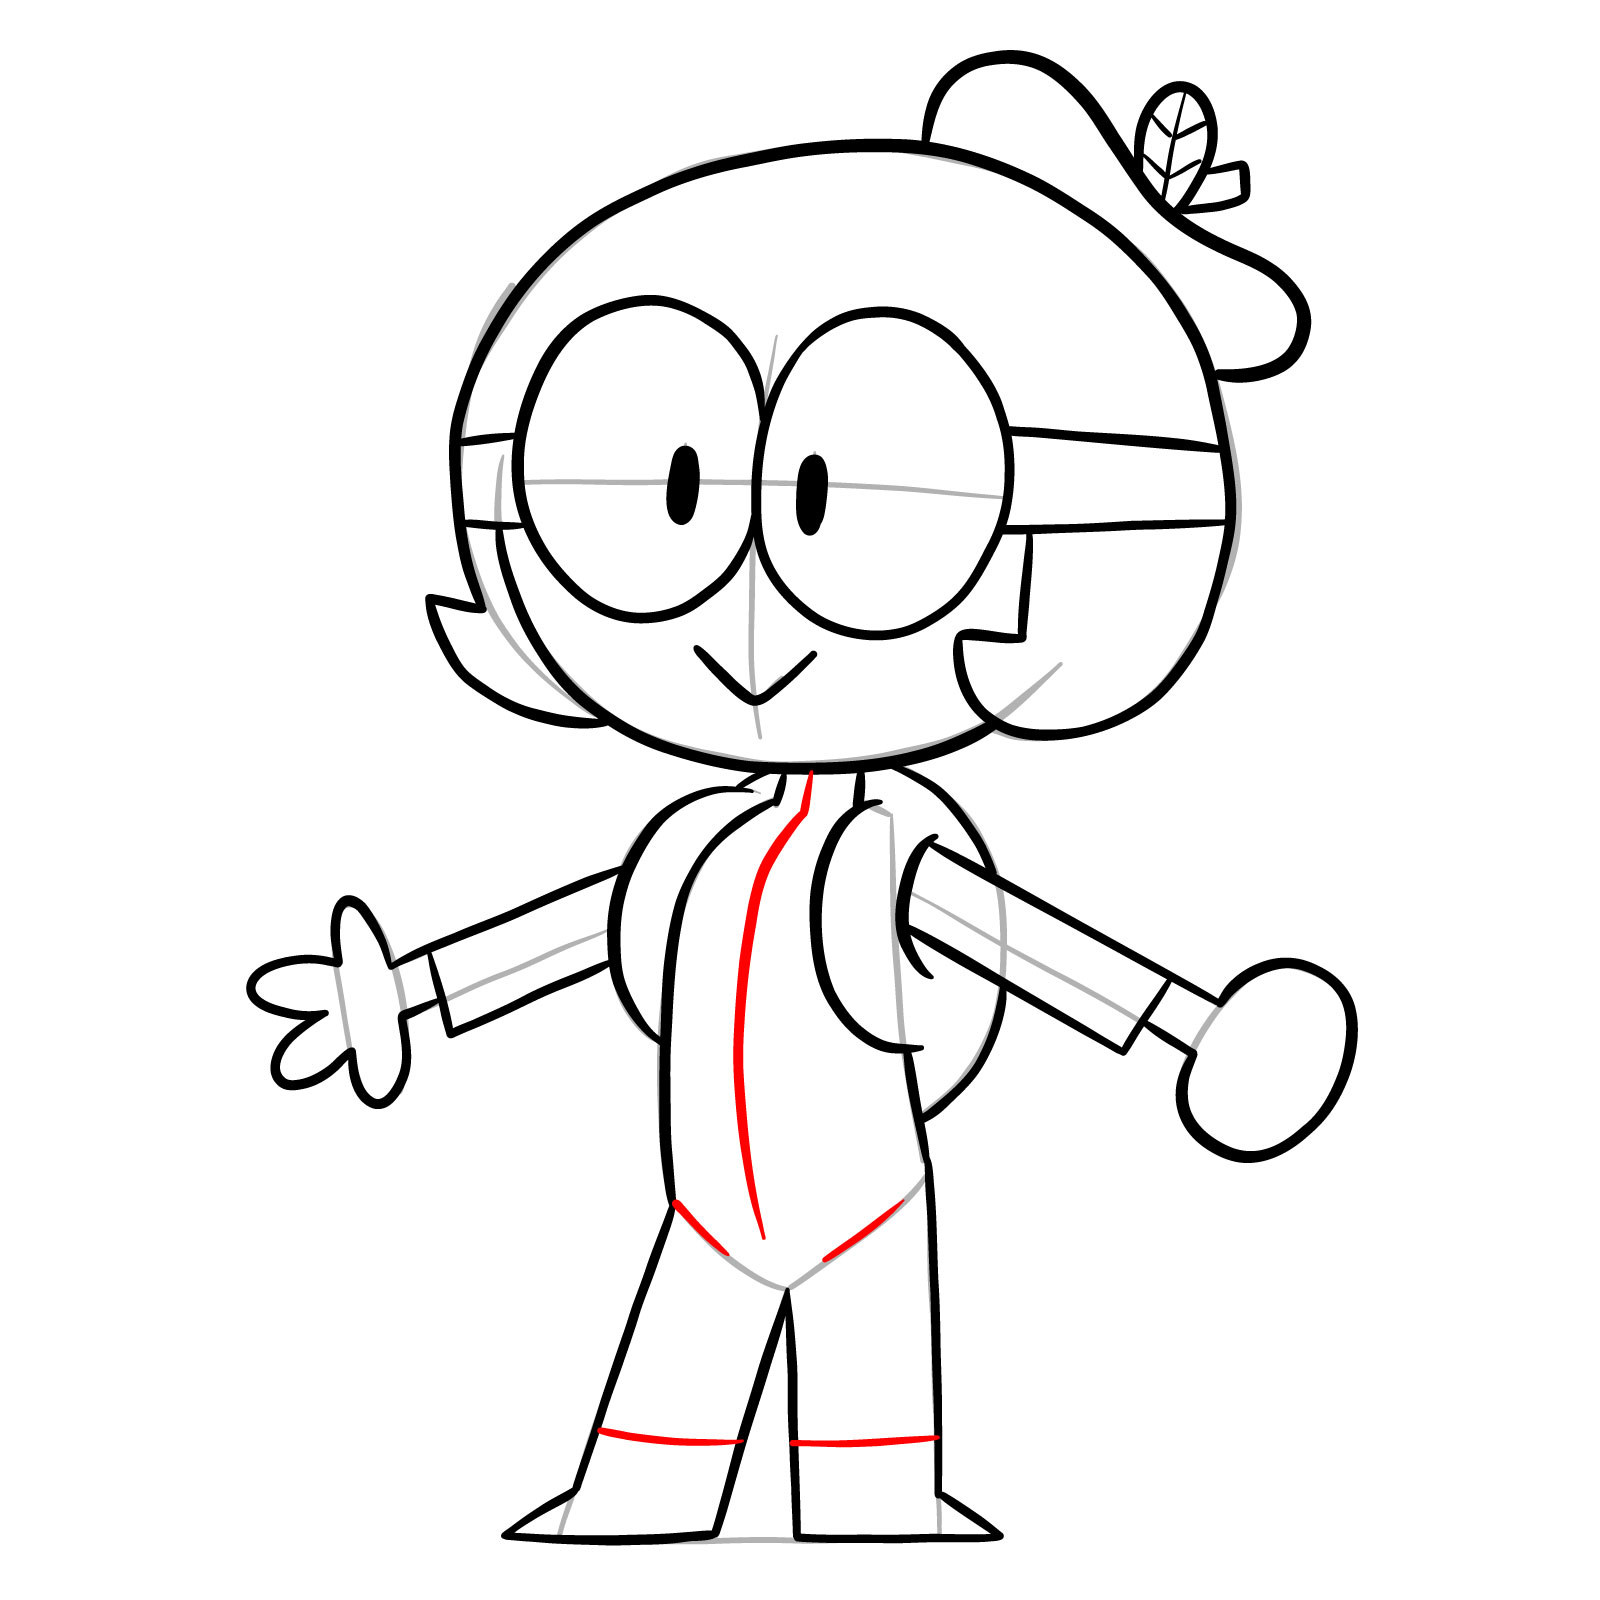 How to draw Dendy from OK K.O.! - step 20